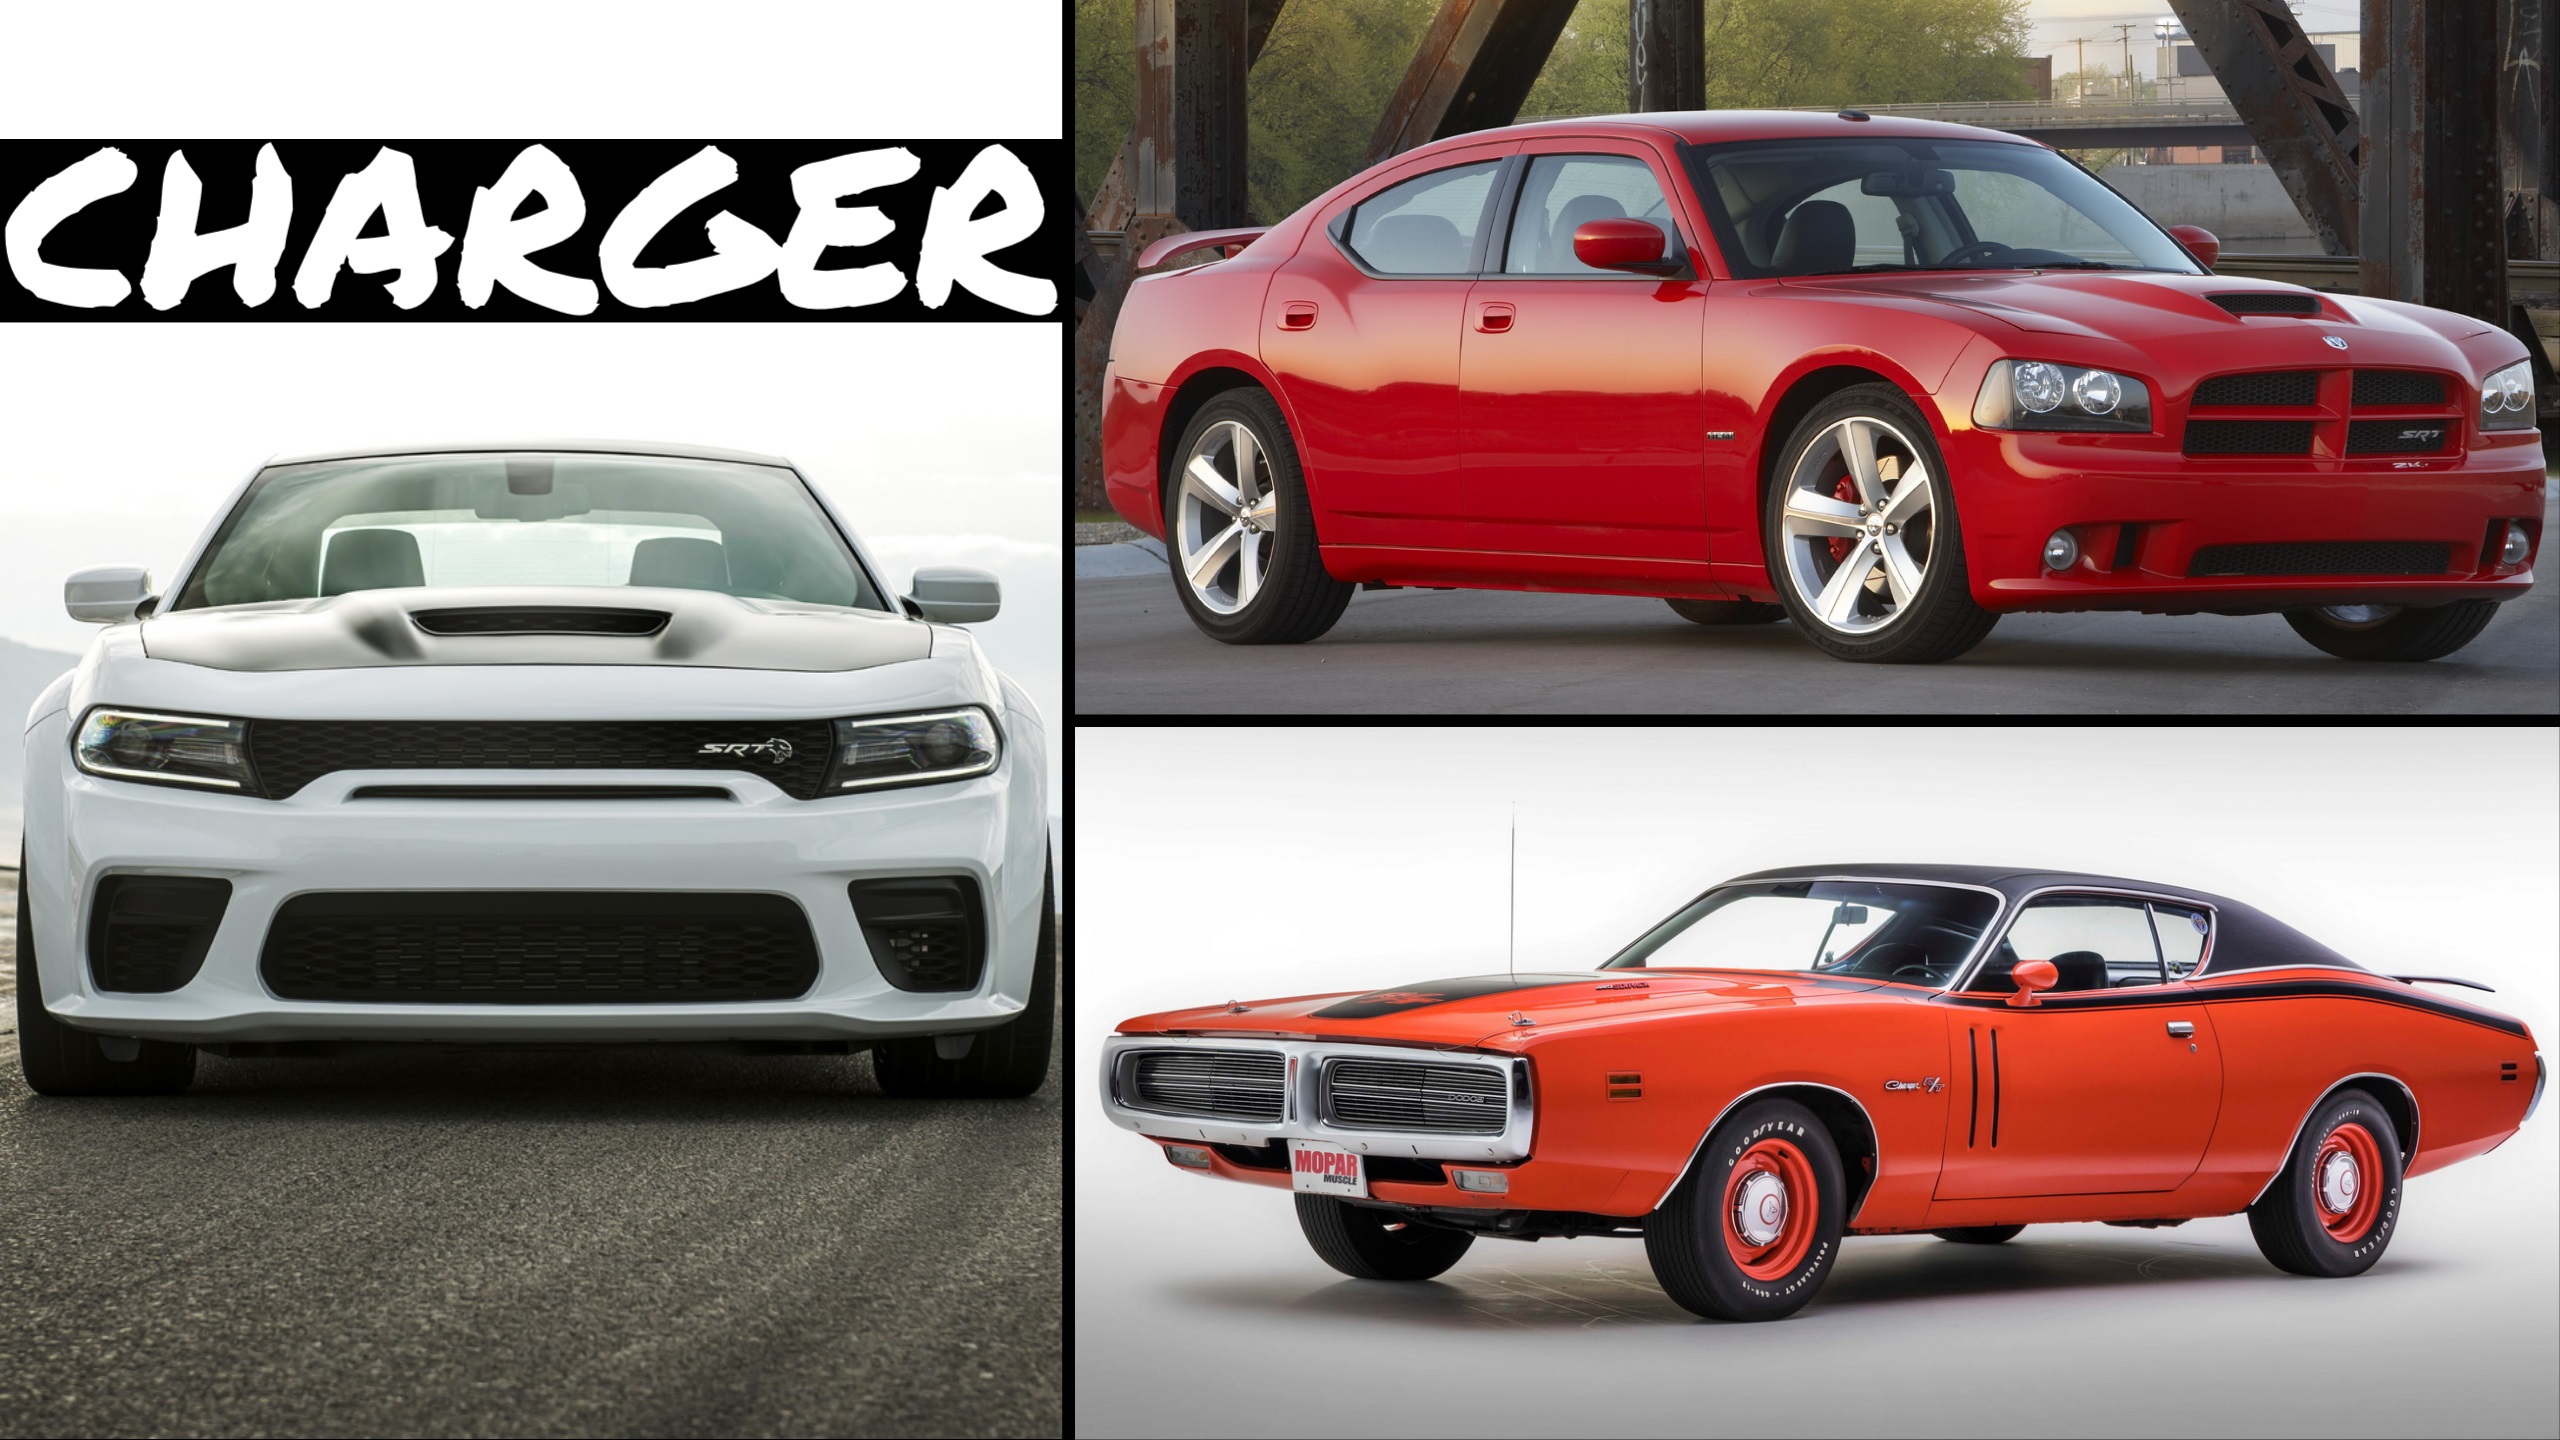 Auto Evolution: From Wicked 2-Door Fastback to Muscle Sedan - The Dodge  Charger Story - autoevolution